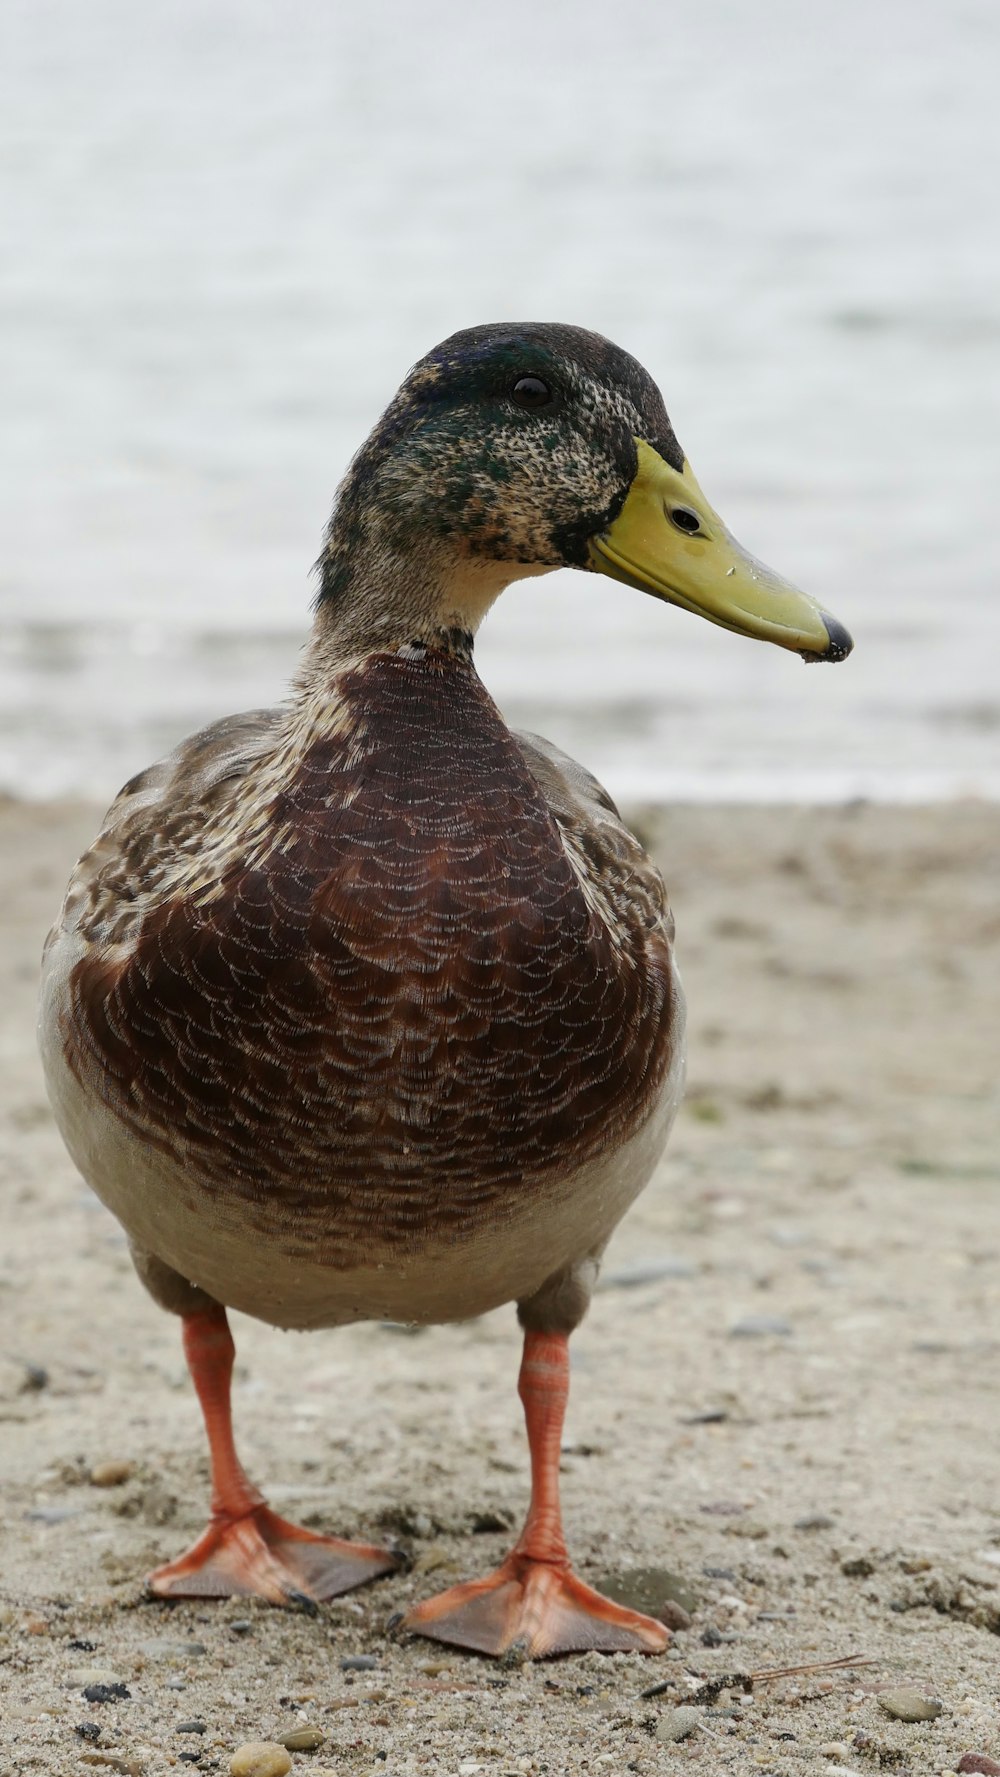 a close up of a duck on a beach near the water